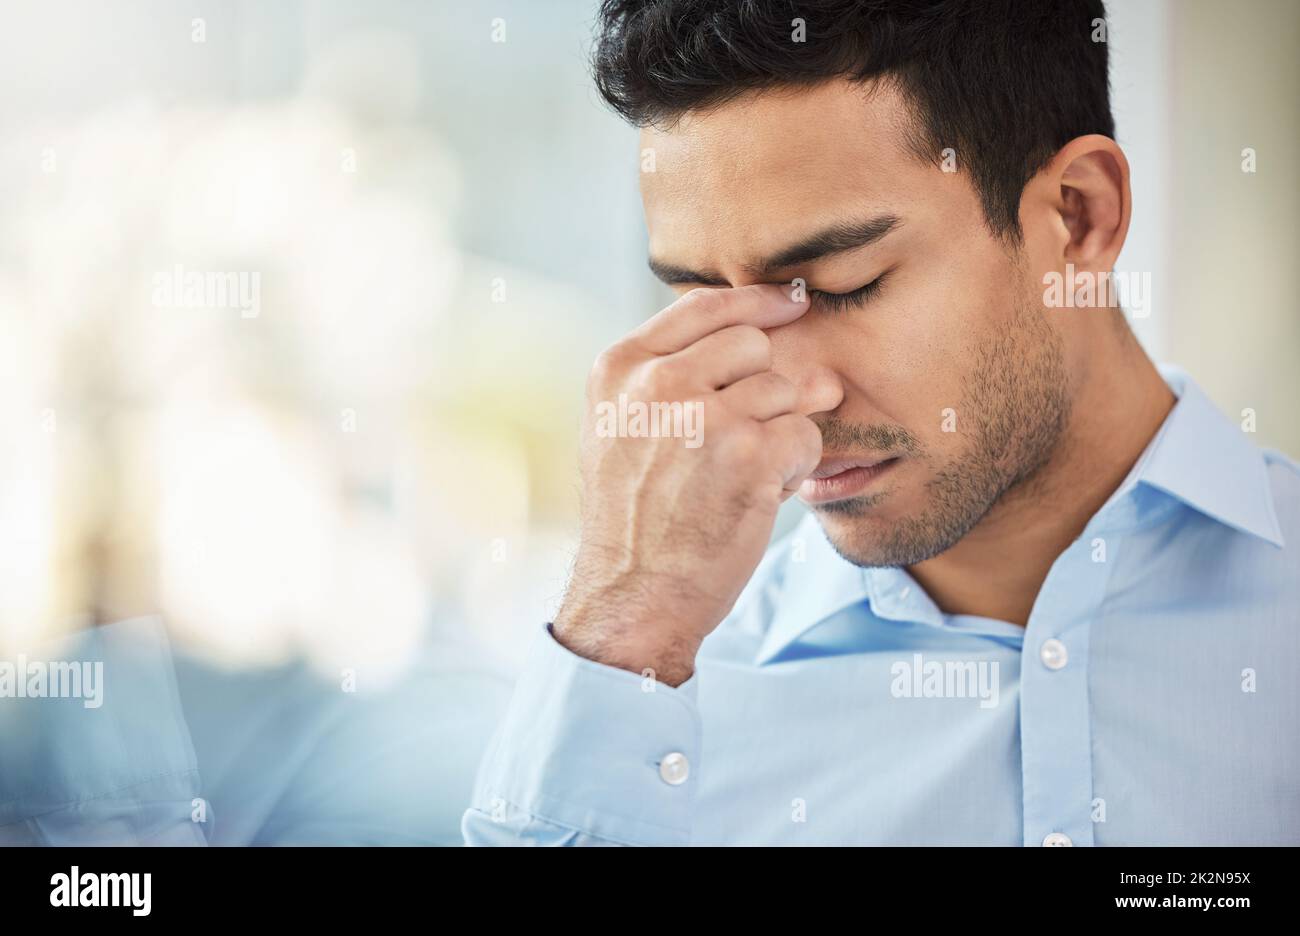 Sometimes challenges arise last minute. Shot of a businessman experiencing a headache at work. Stock Photo